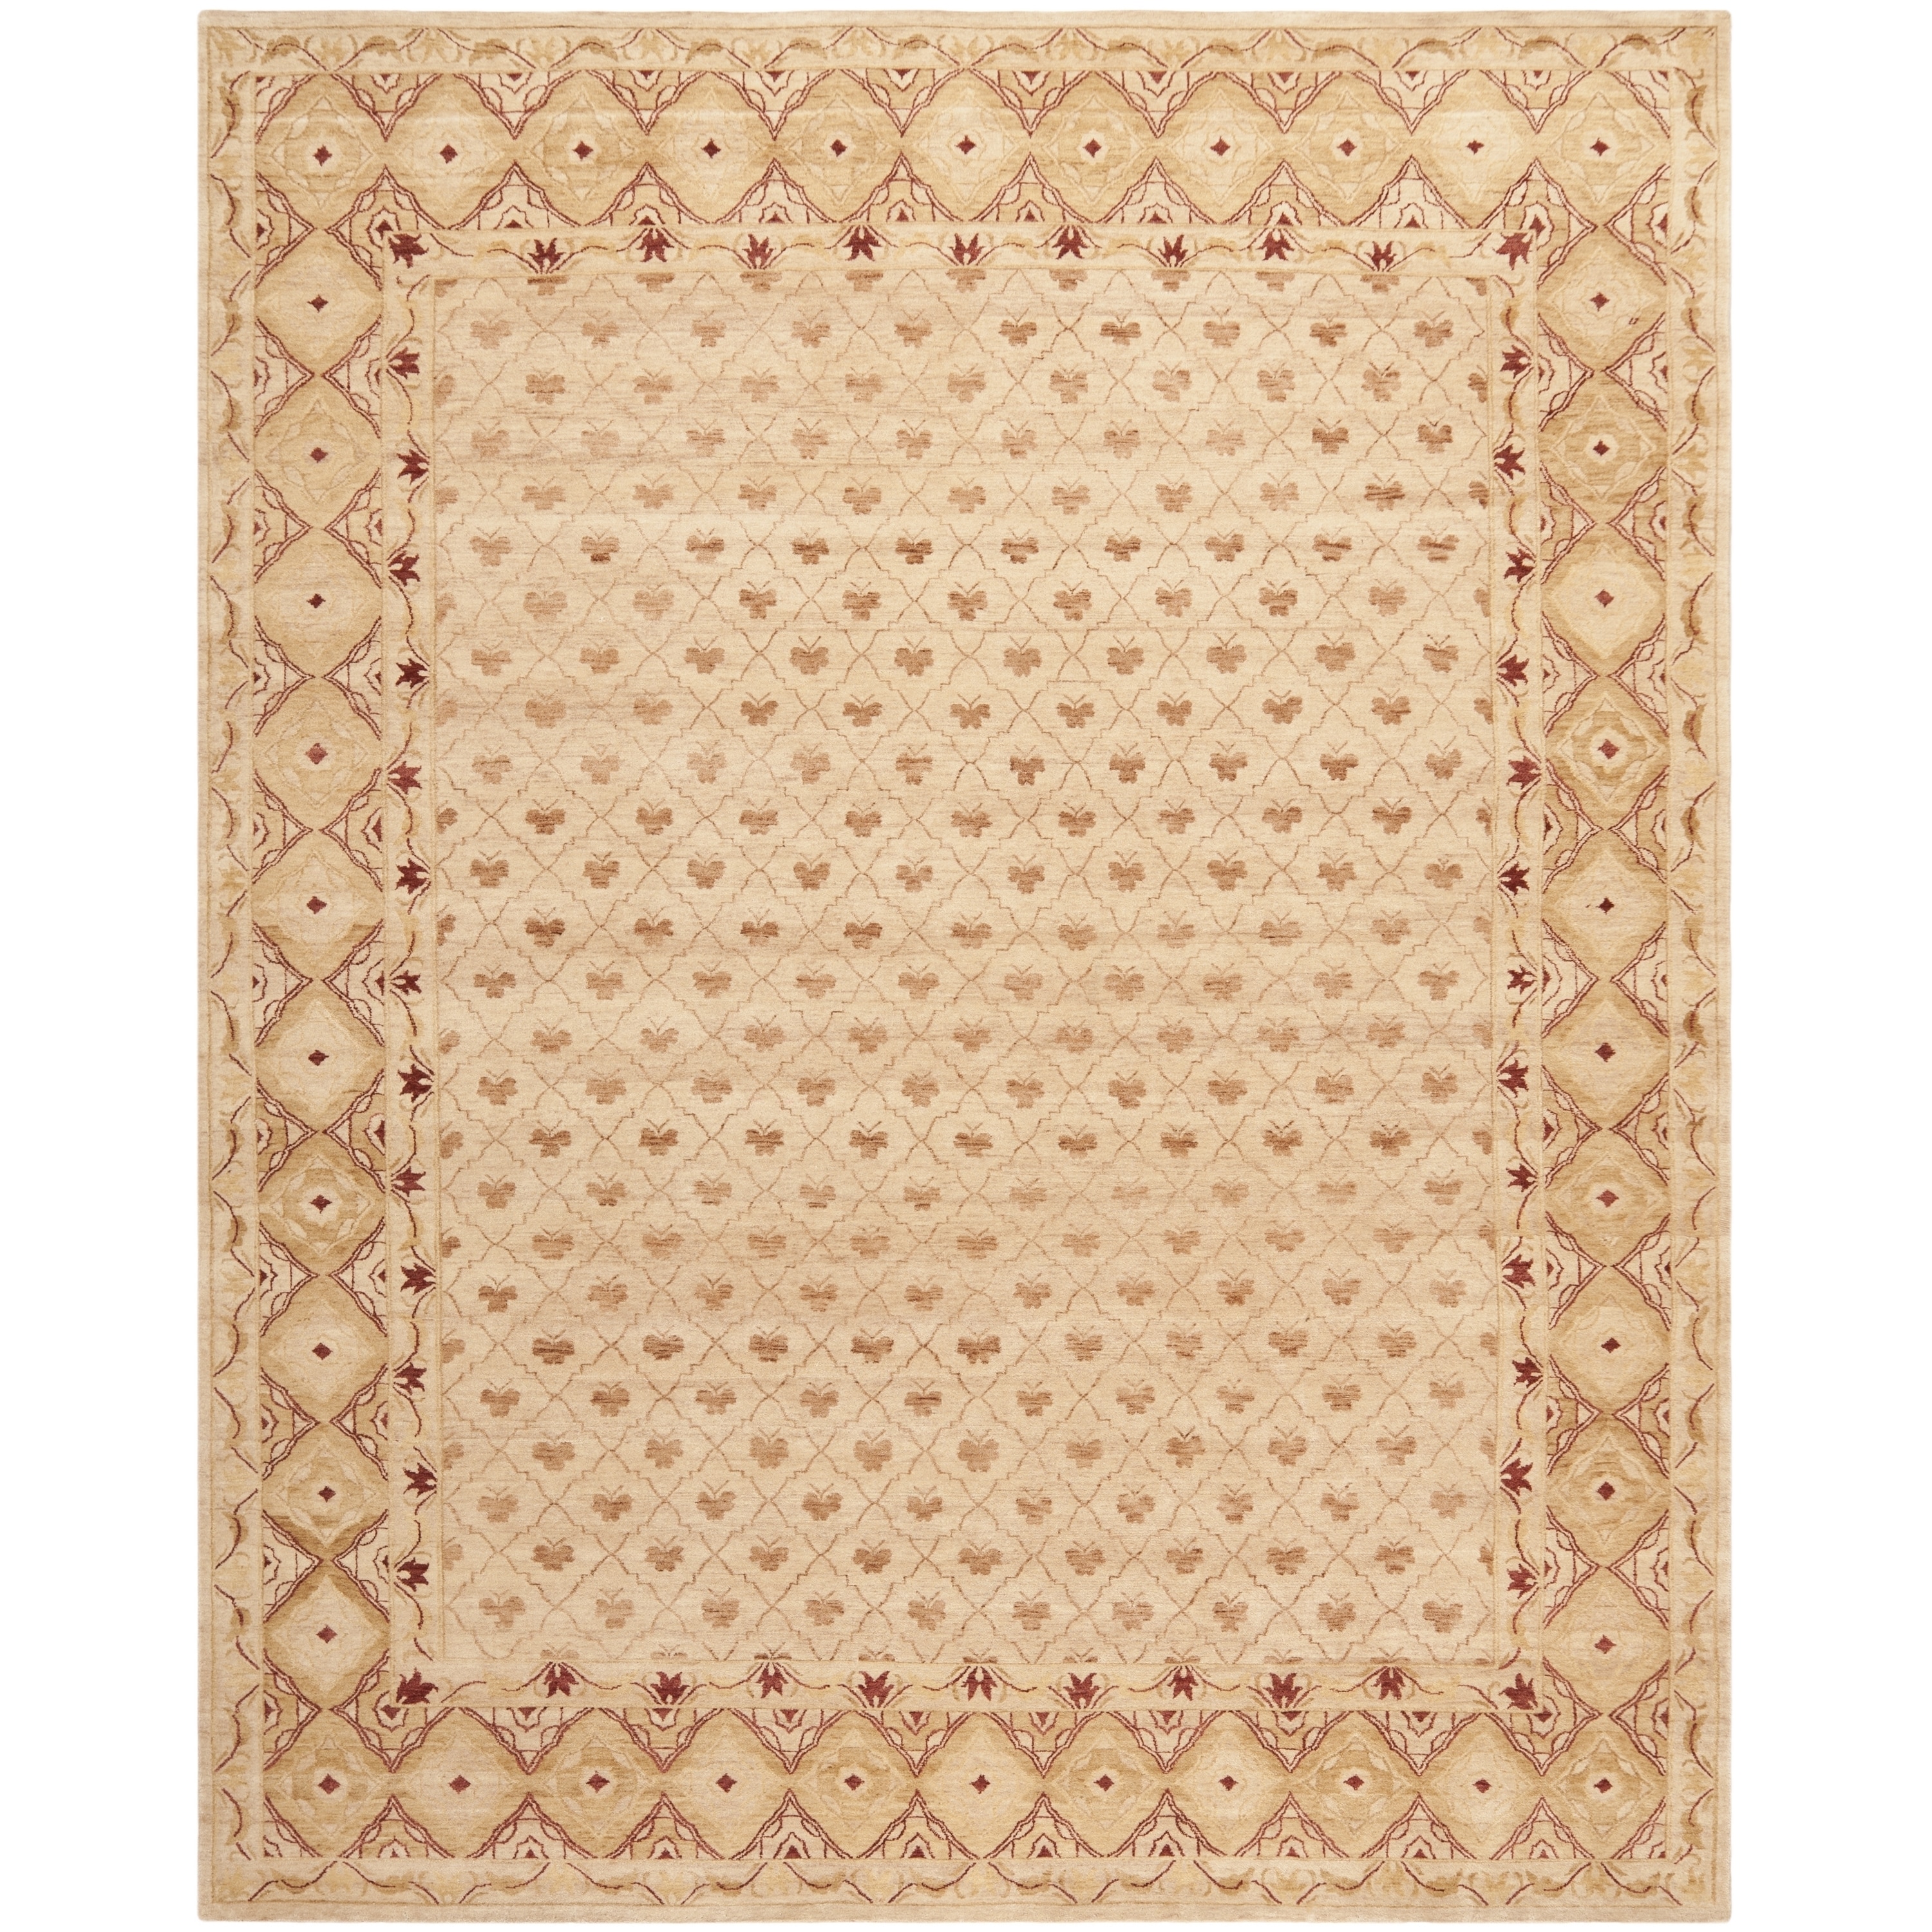 Safavieh Hand knotted Marrakech Ivory/ Red Wool Rug (8 X 10)